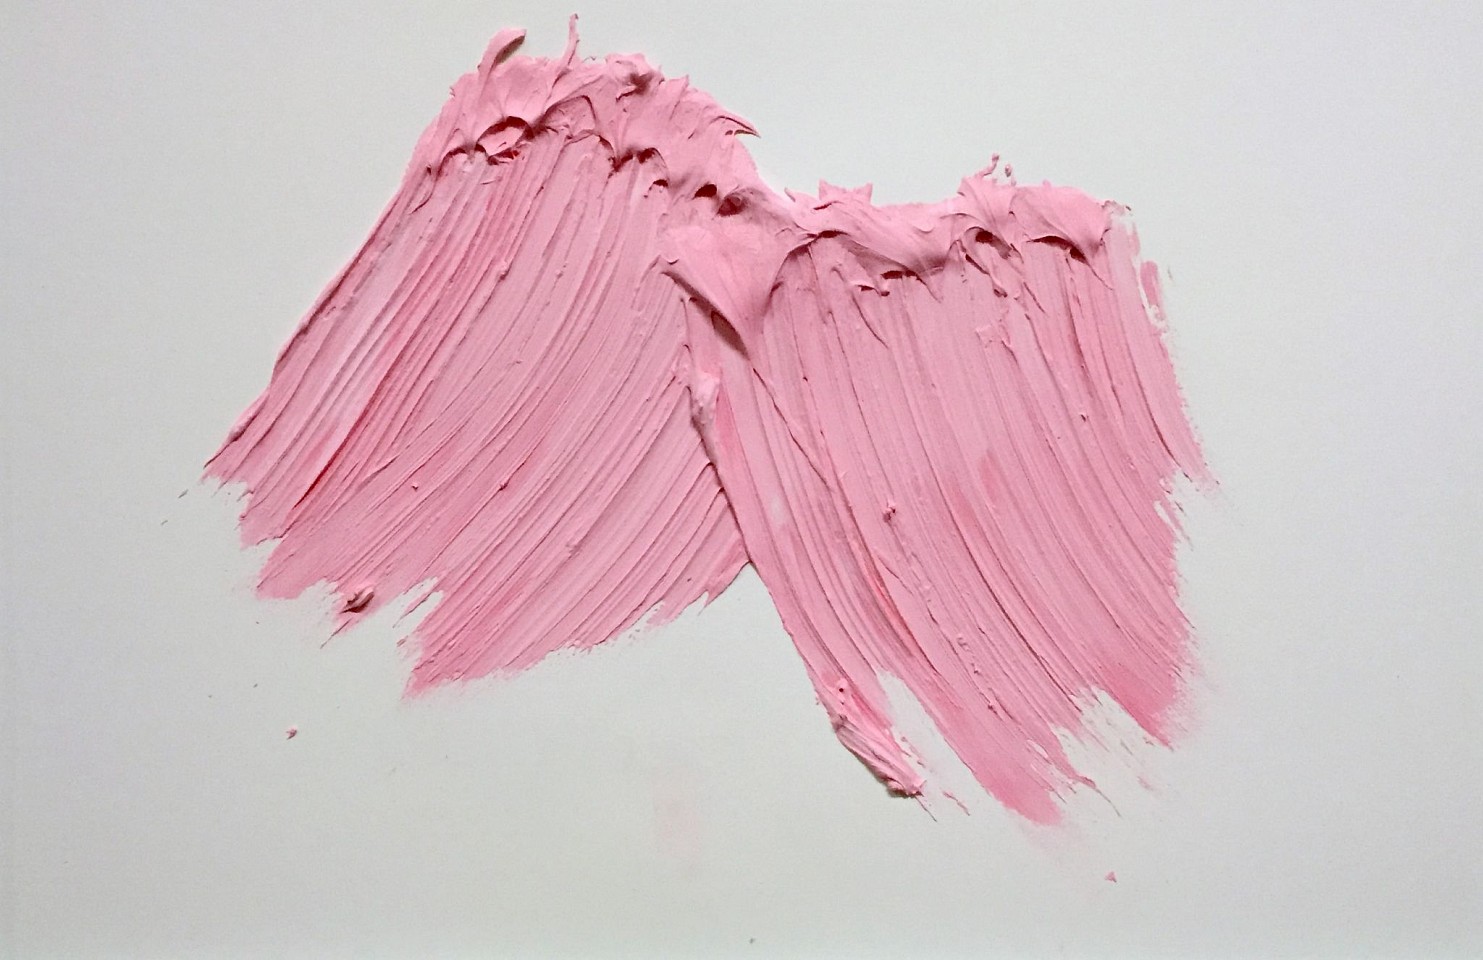 Donald Martiny, Untitled, 2017
polymer and pigment on paper, 22.75 x 30.5 in. paper
pink
MART0046